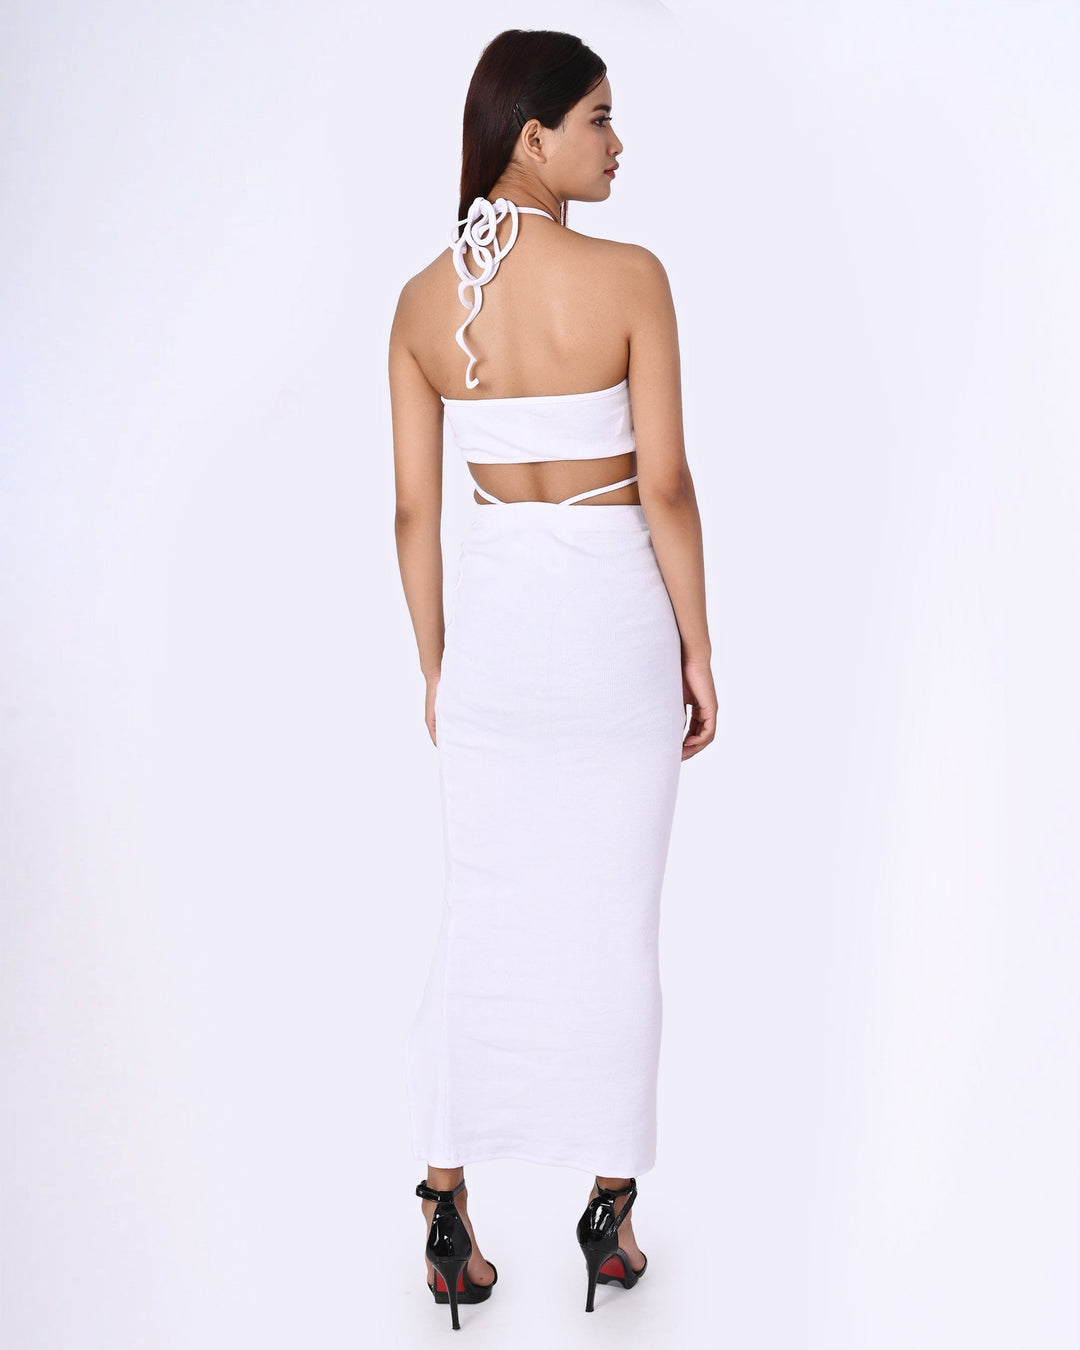 Get the heads roll white 2 piece matching set